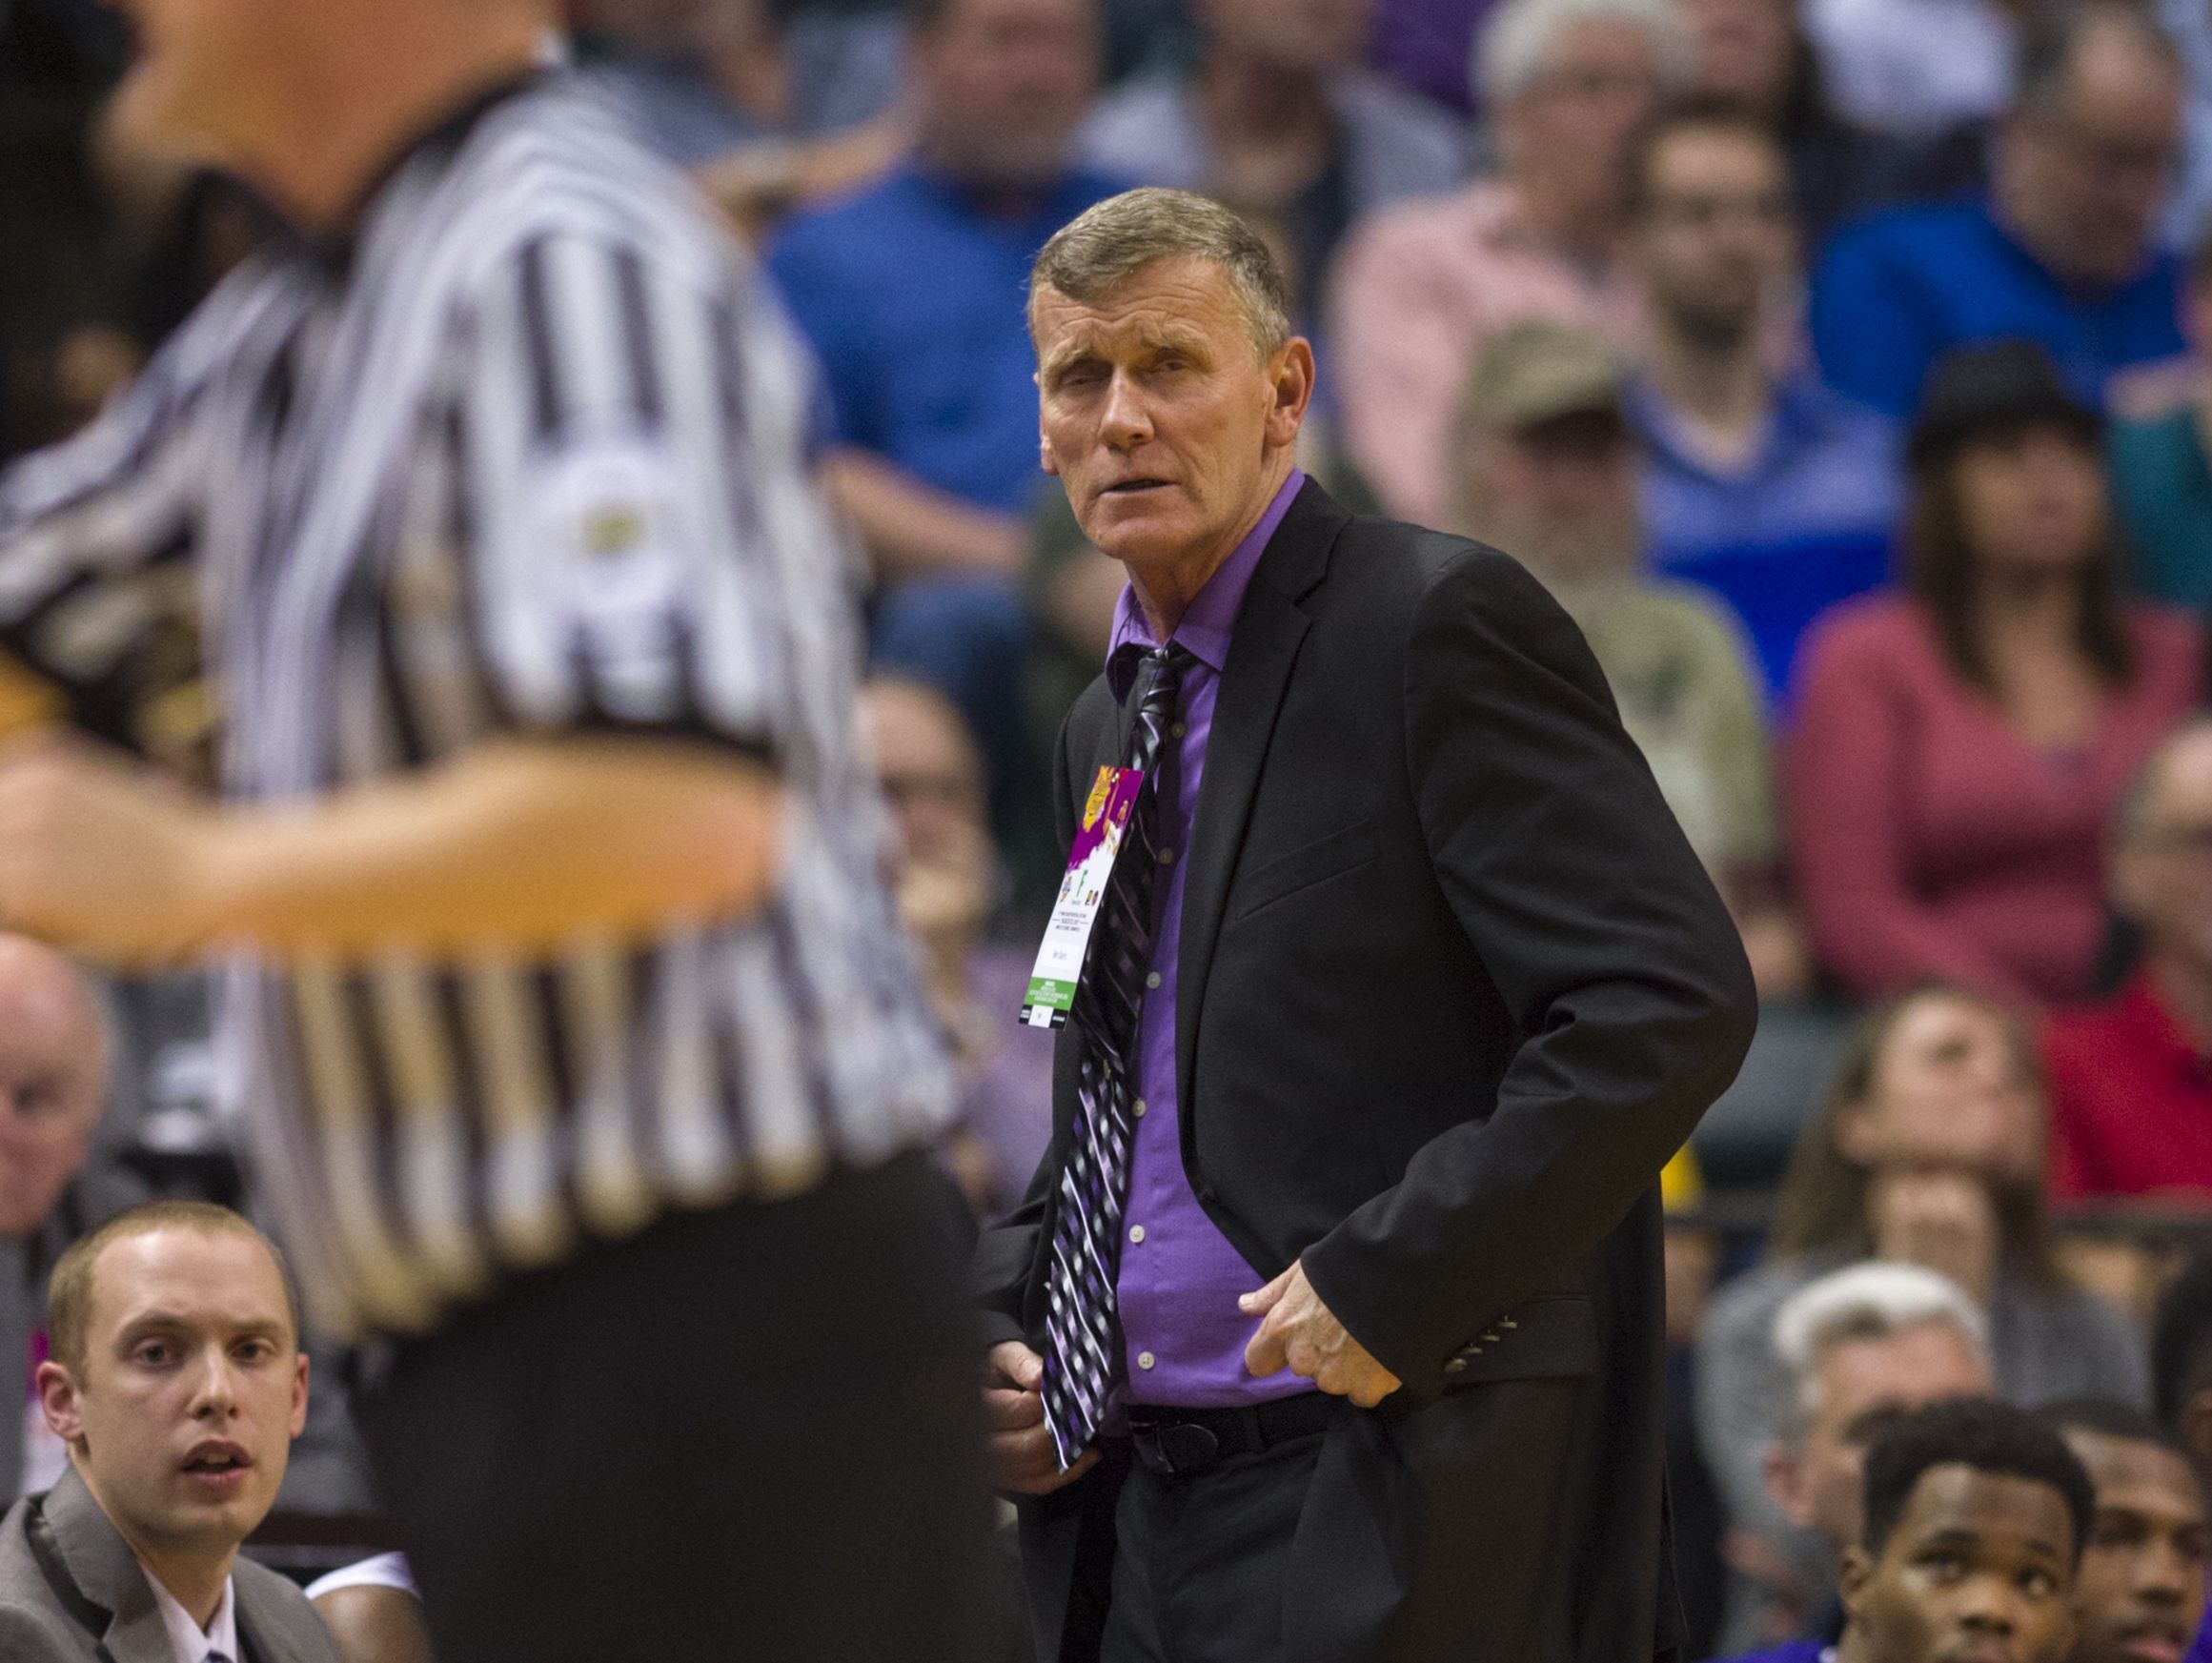 Ben Davis coach Mark James looks towards a game official as he reports the team's foul to the scorer's table during the first half of the IHSAA 2017 Class 4A State Championship Game at Bankers Life Fieldhouse Saturday.